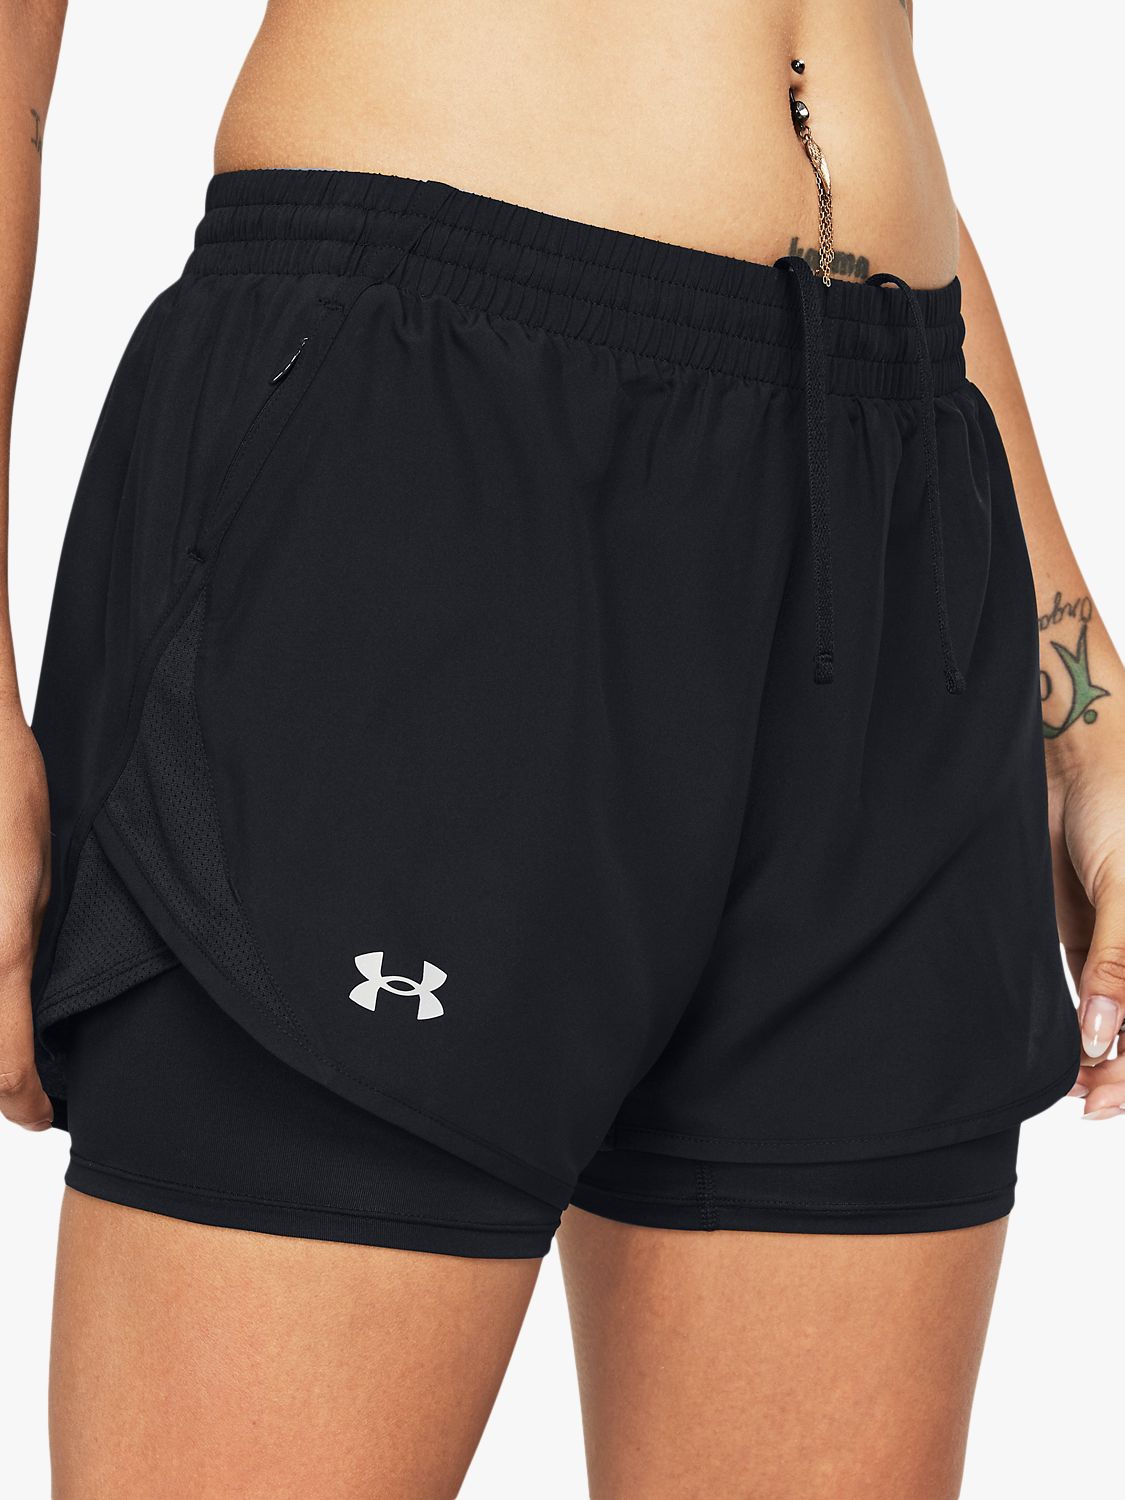 Buy Under Armour Fly B 2 in 1 Shorts, Black/Reflective Online at johnlewis.com